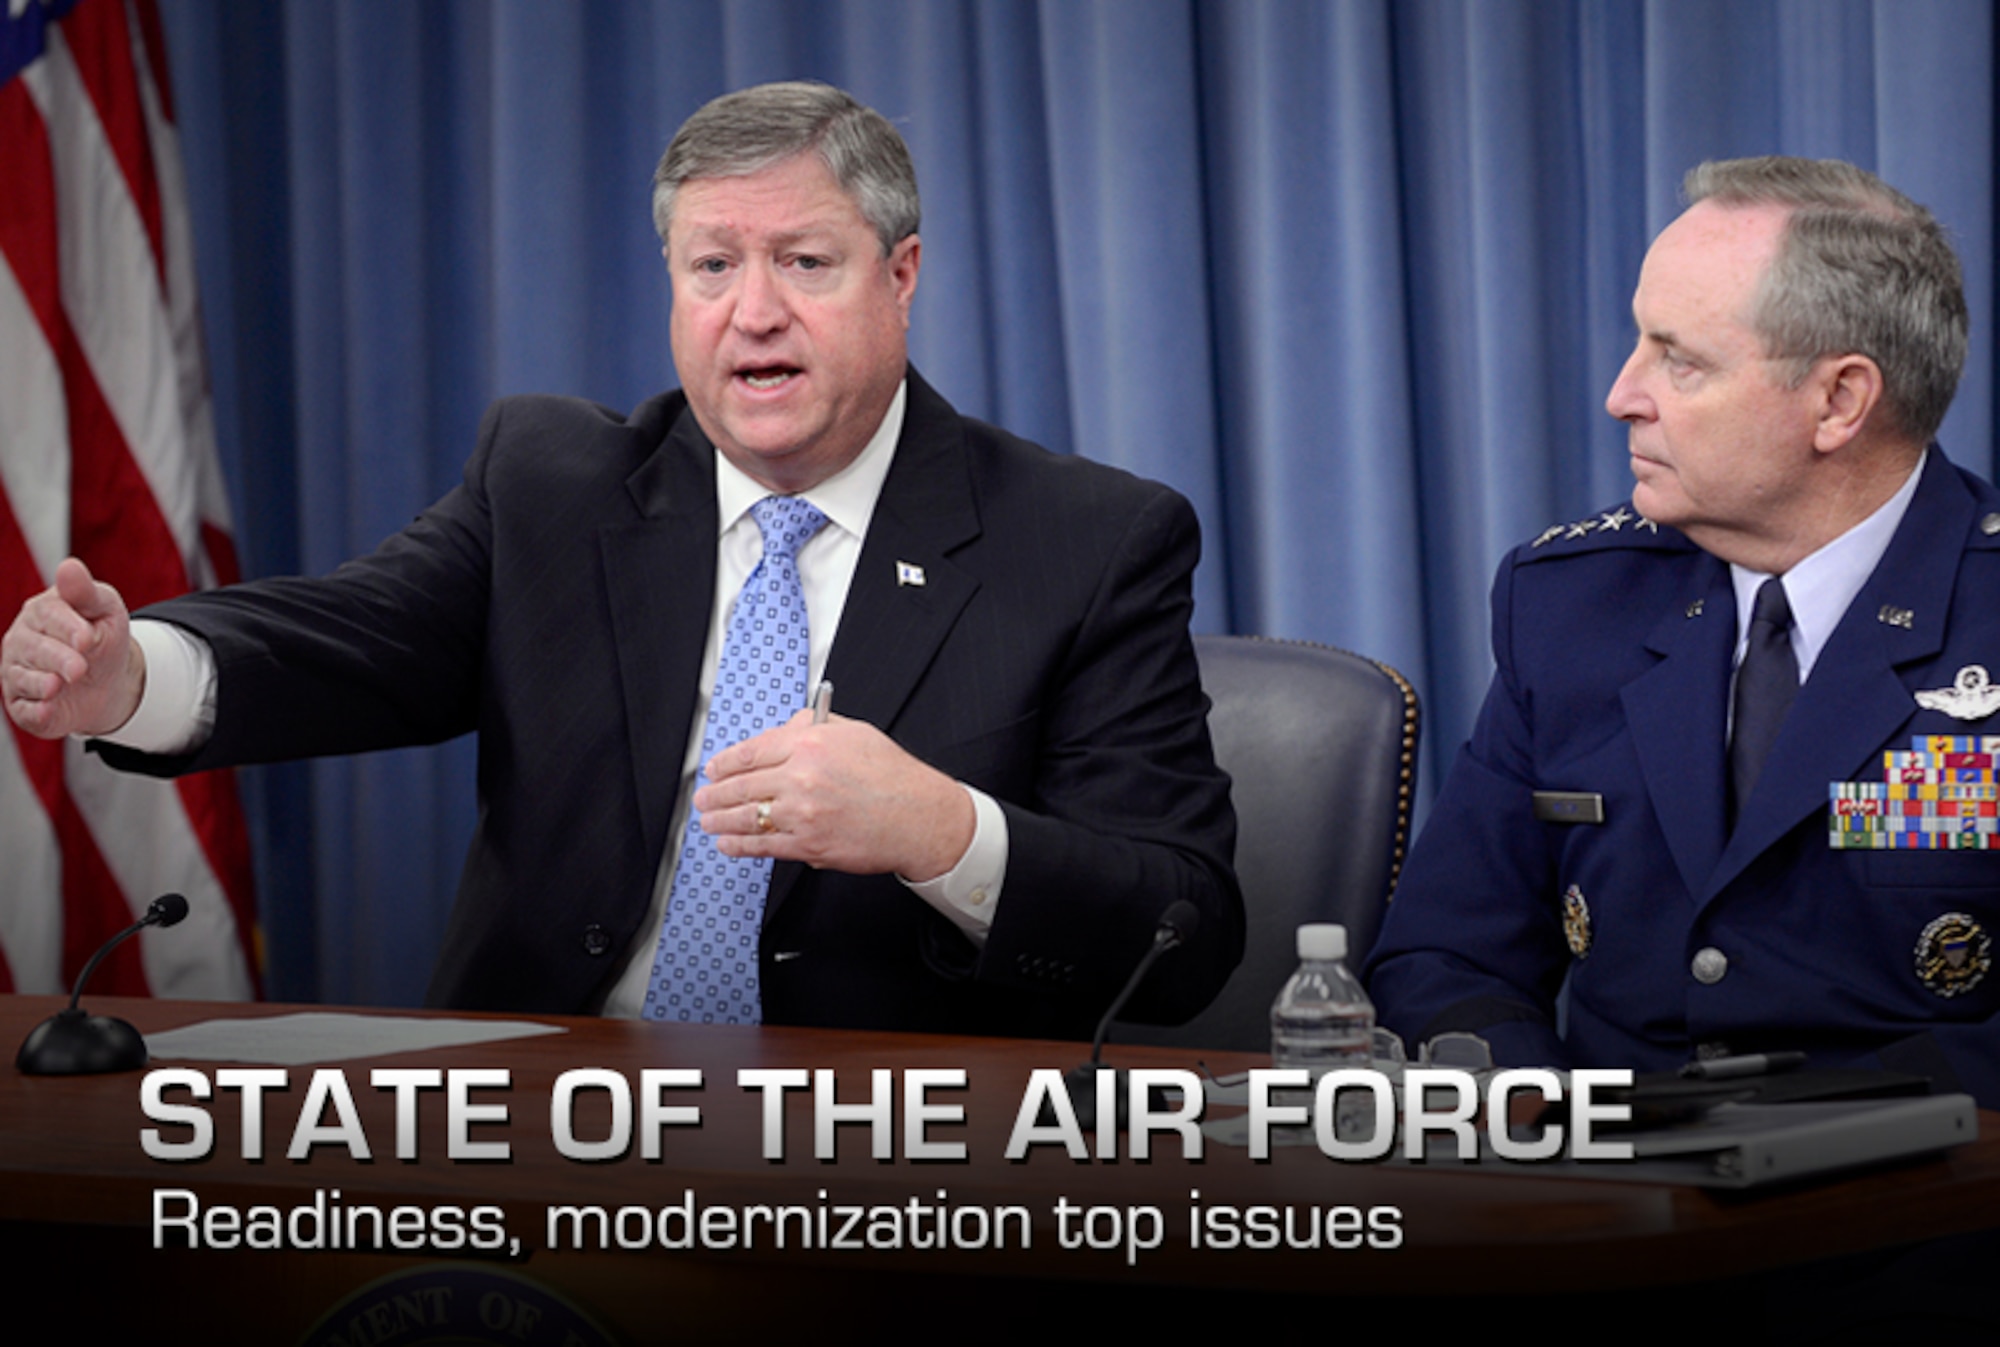 Secretary of the Air Force Michael Donley and Air Force Chief of Staff Gen. Mark A. Welsh III field questions from members of the Pentagon press corps at the Pentagon, May 24, 2013. During the press briefing, Donley and Welsh addressed the force structure, readiness and modernization challenges the Air Force is facing in the current fiscal environment.  (U.S. Air Force photo/Scott M. Ash)